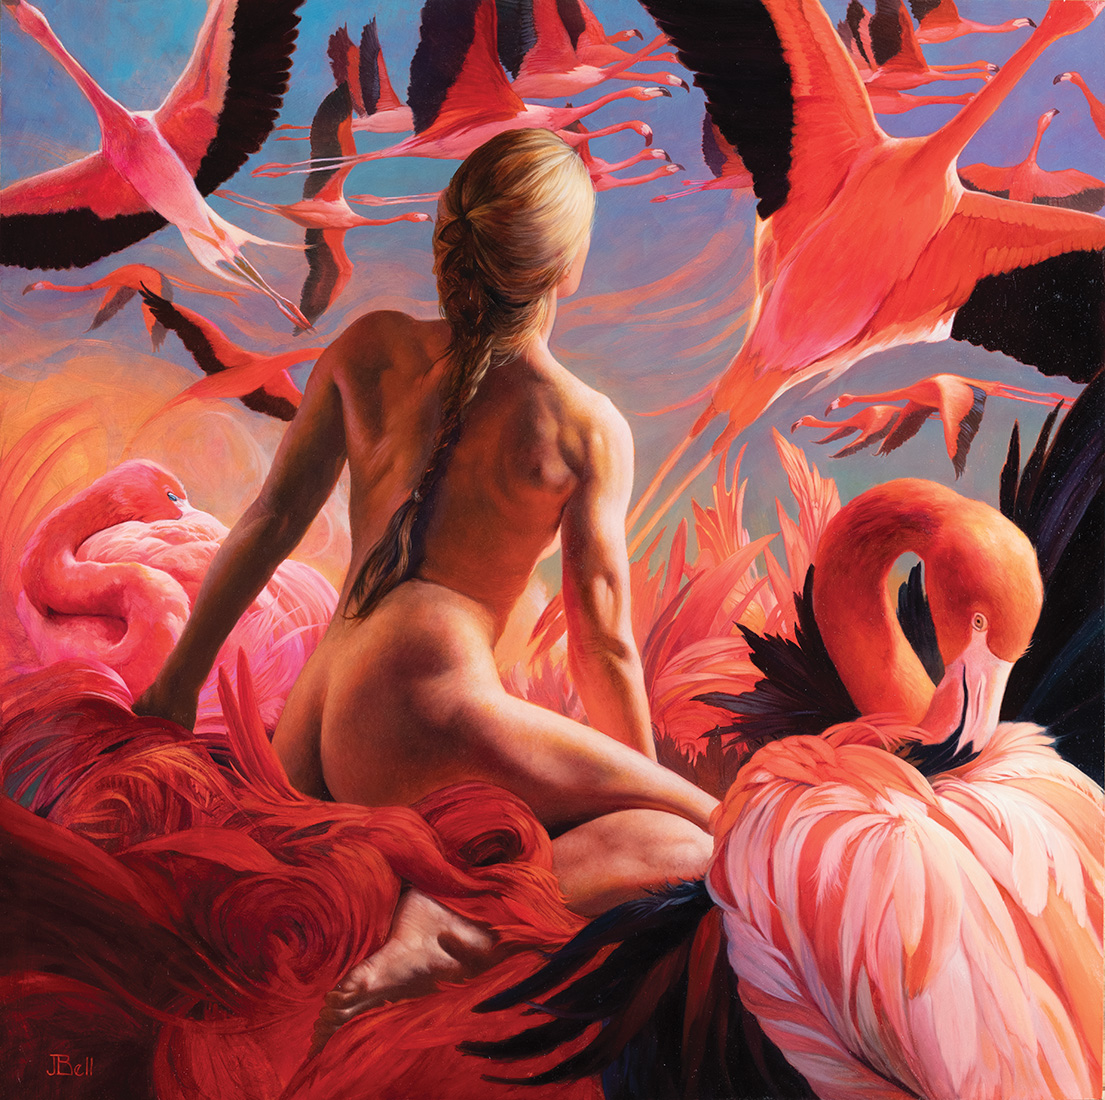 A woman starring up at flying flamingoes.